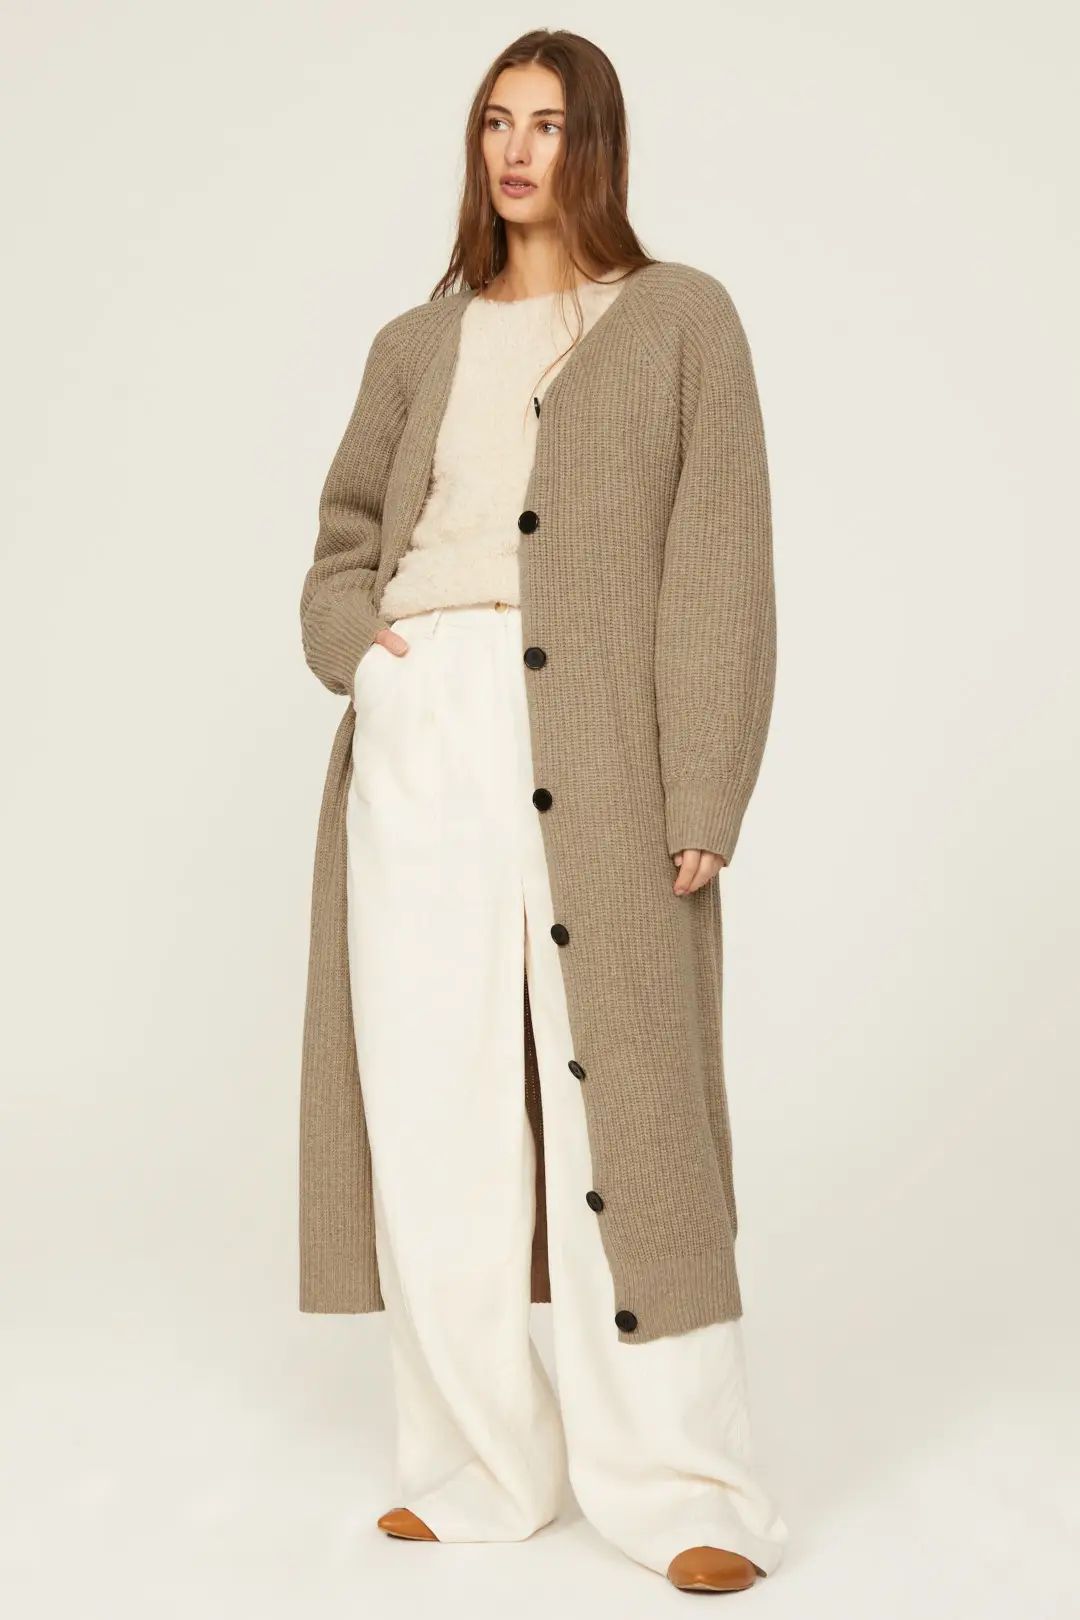 By Malene Birger | Rent the Runway